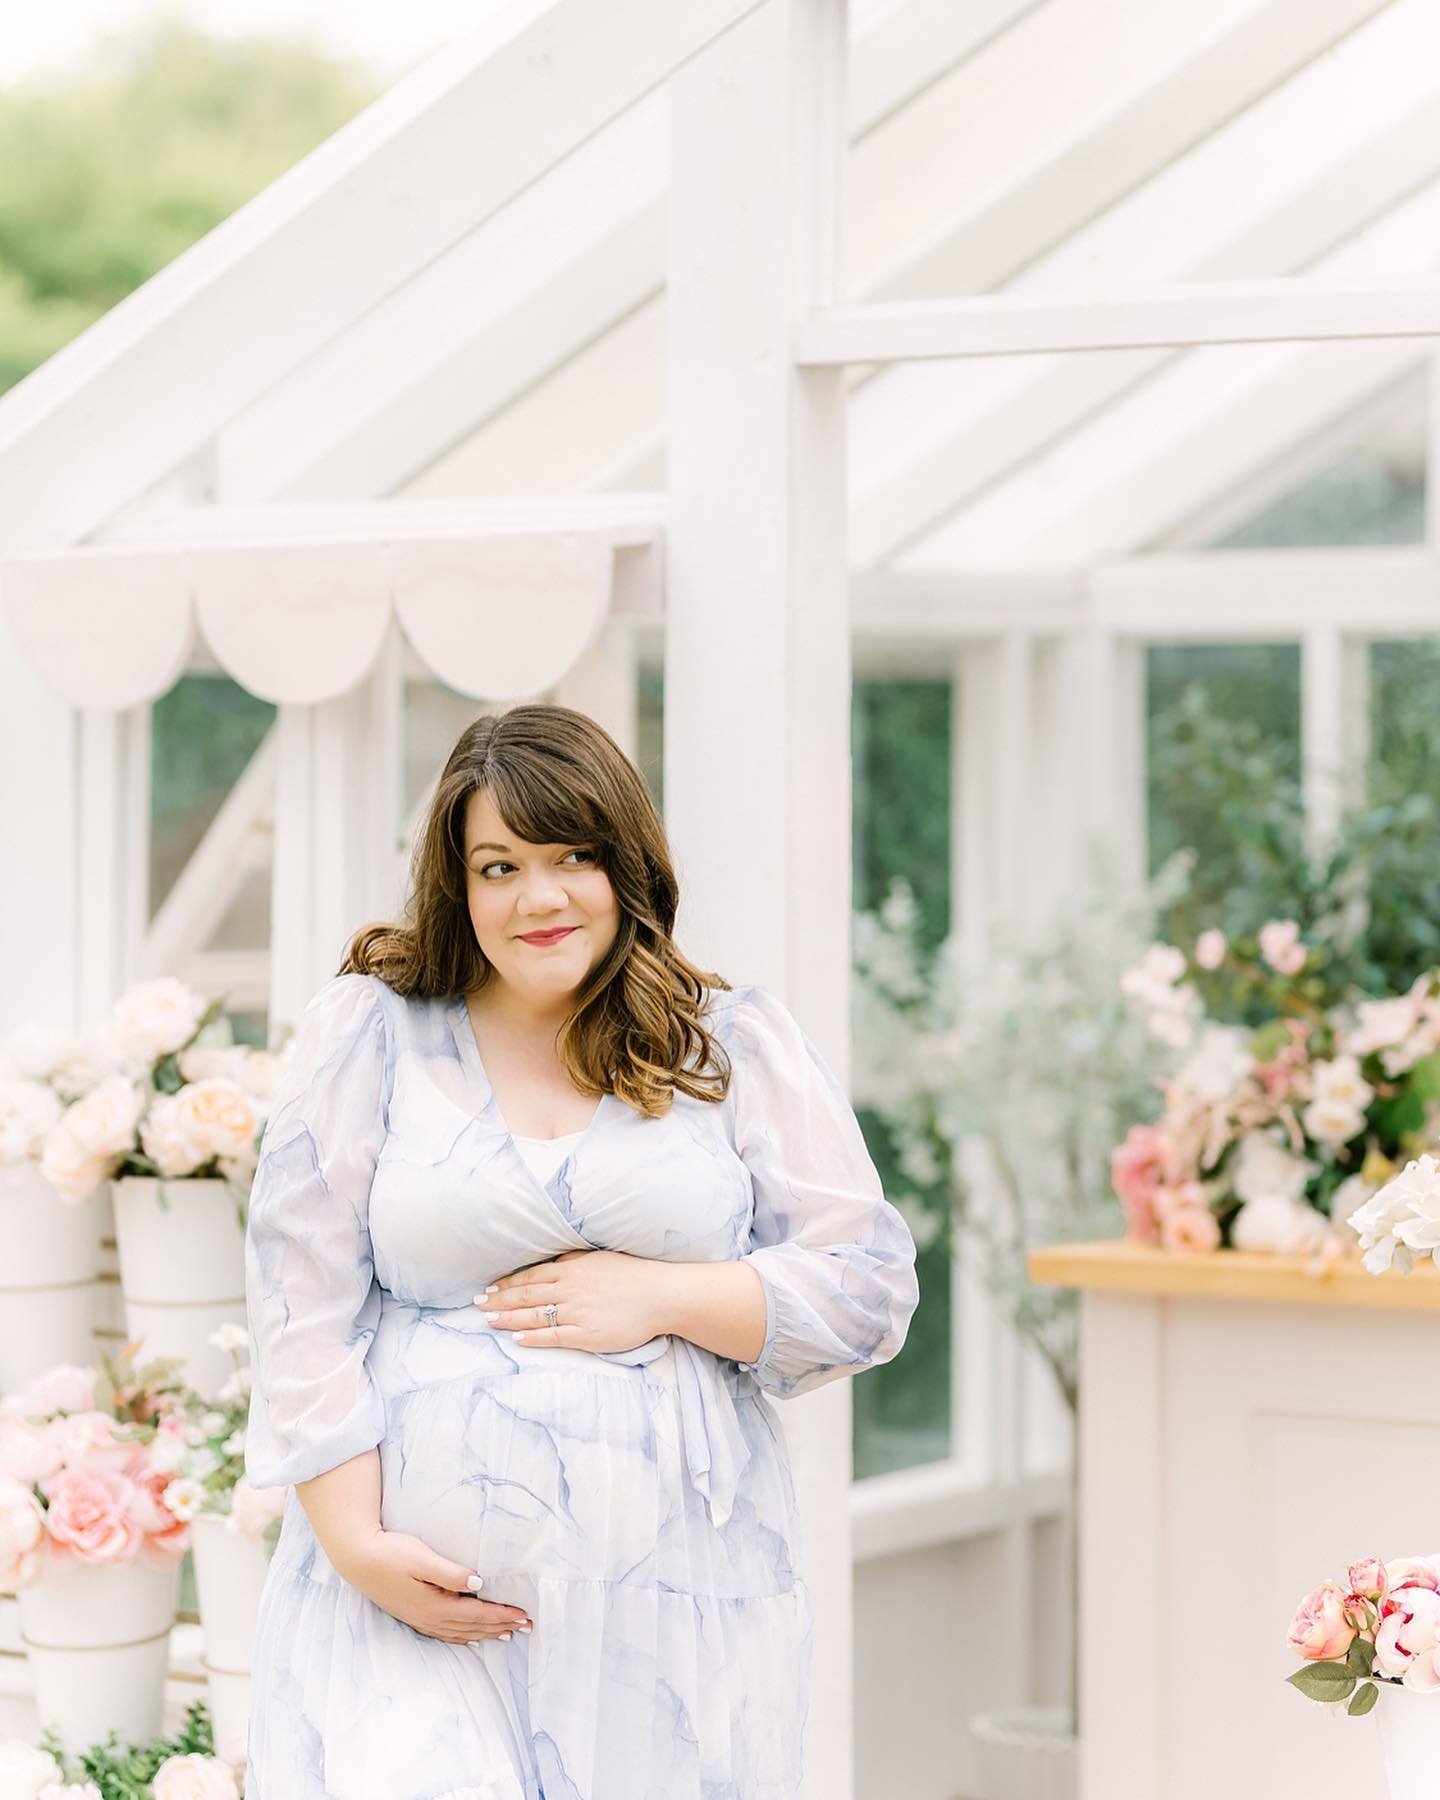 My beautiful sister (and baby niece coming soon) 🤍 And how stunning is this setting for maternity photos&hellip;
.
.
.
.
.
#dallasnewbornphotographer #dallasmaternityphotographer #dfwnewbornphotographer #dfwmaternityphotographer #planonewbornphotogr